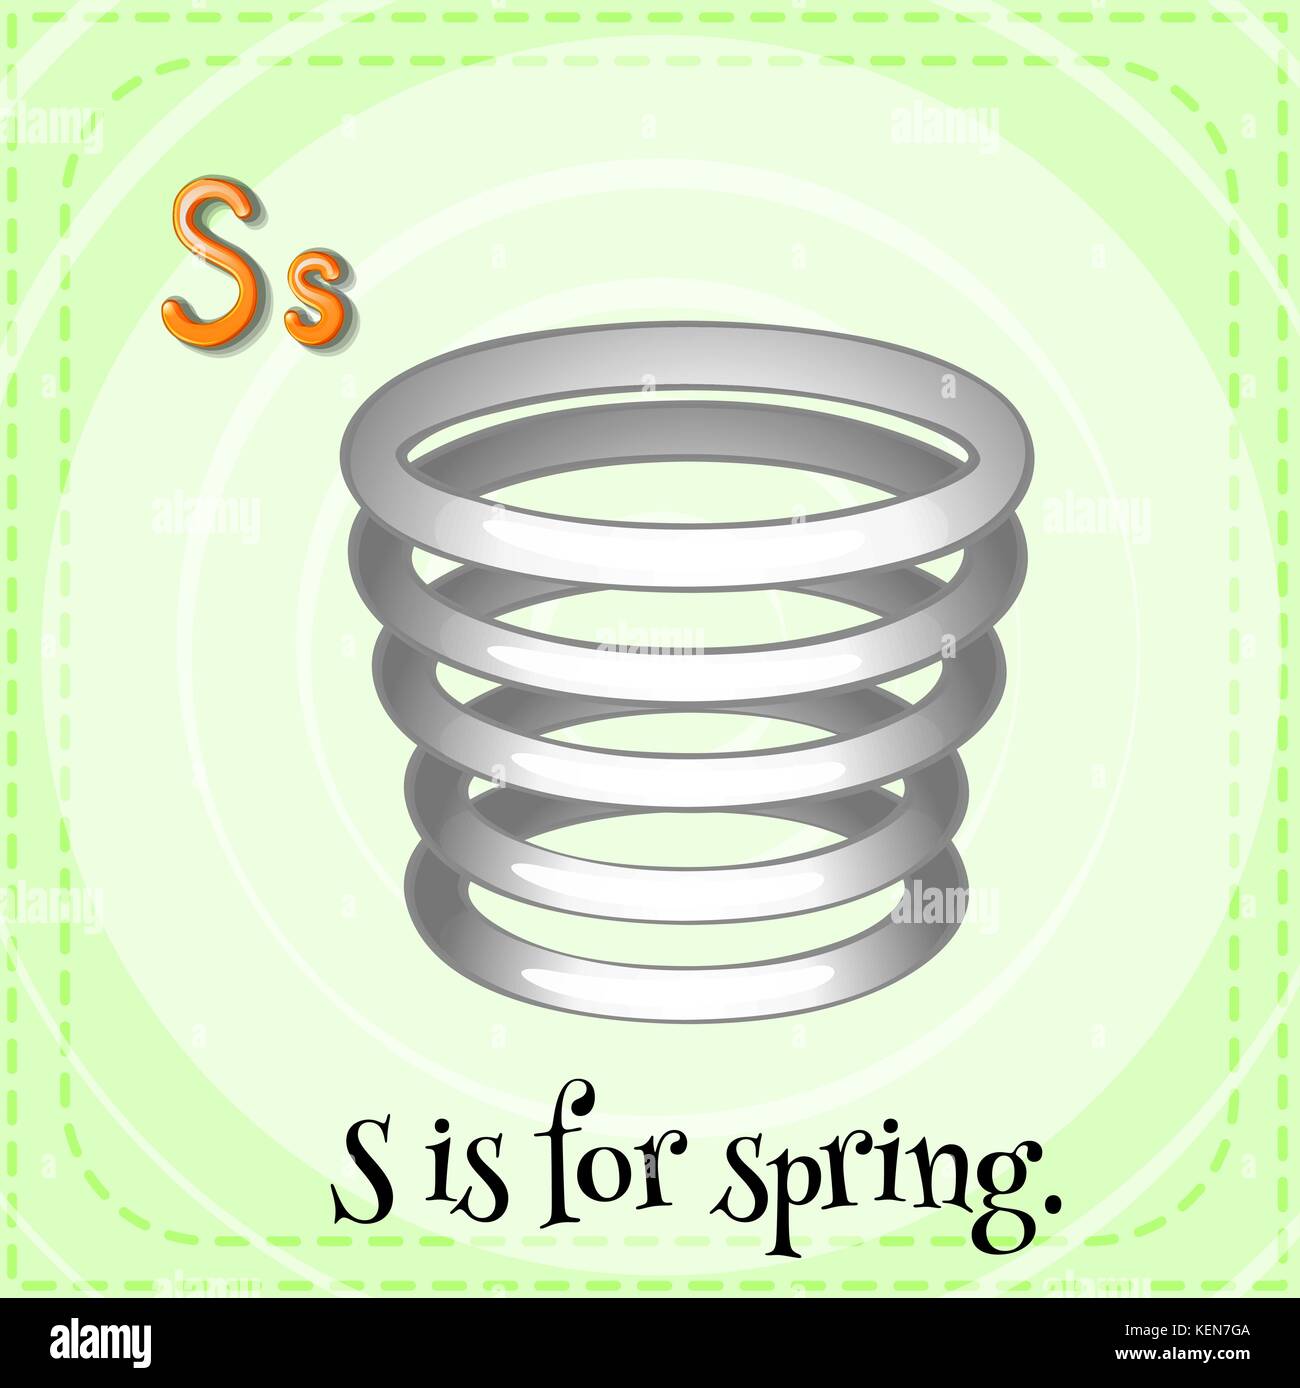 Illustration of a letter S is for spring Stock Vector